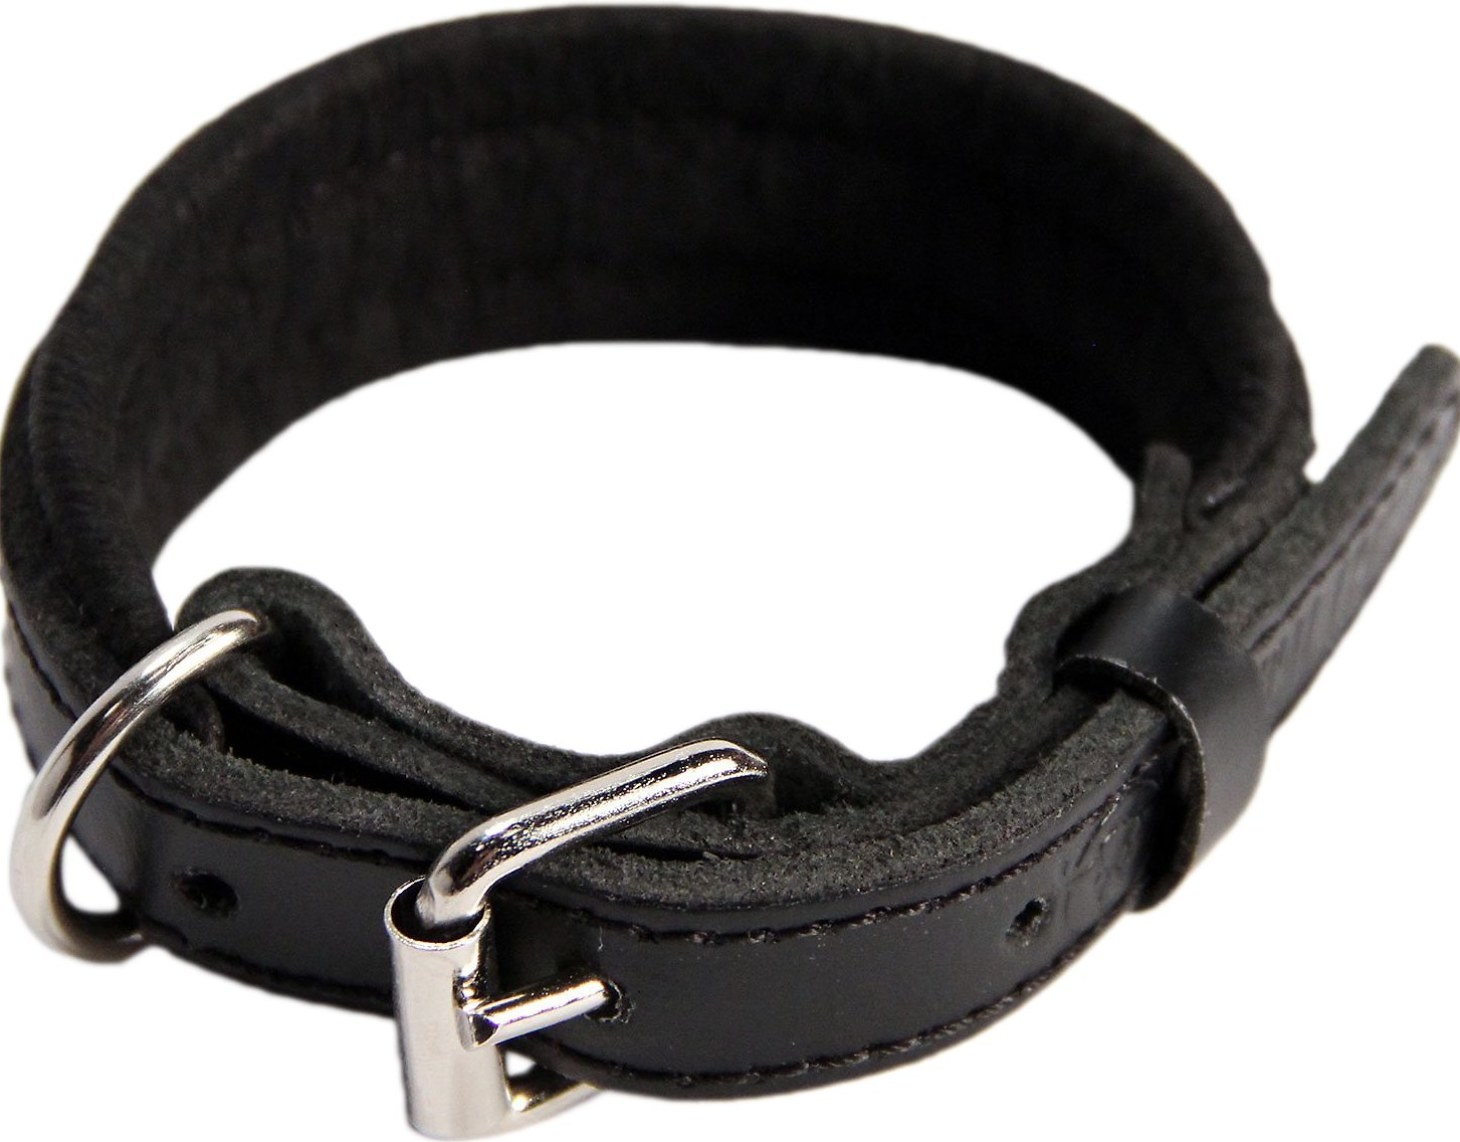 A black leather collar with buckle